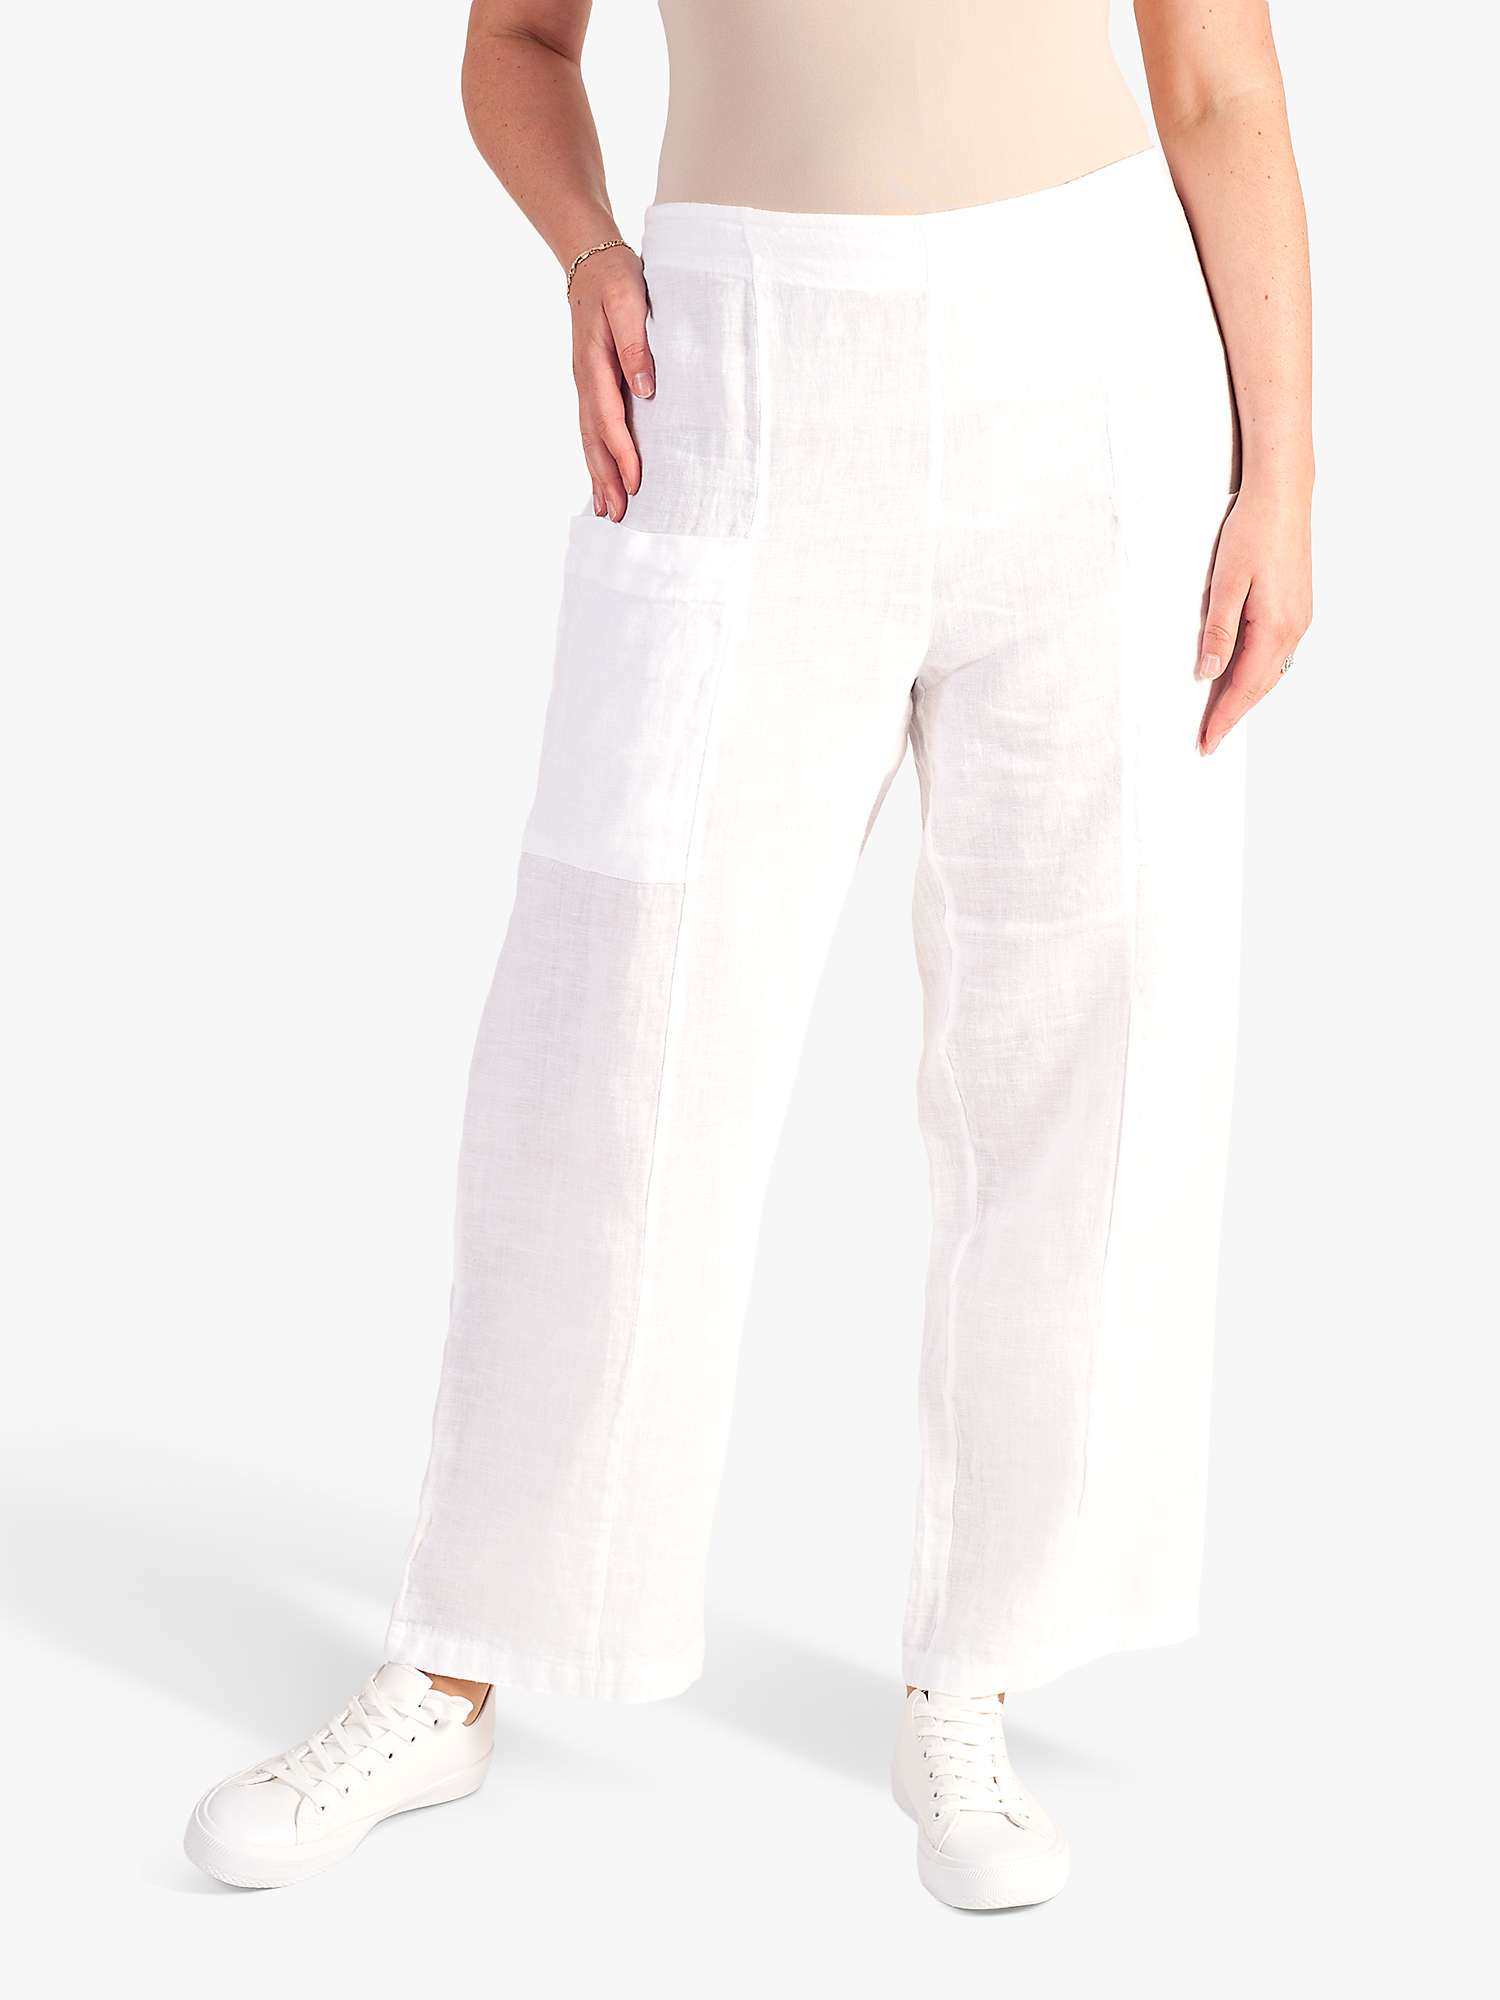 Buy chesca Linen Trousers, White Online at johnlewis.com